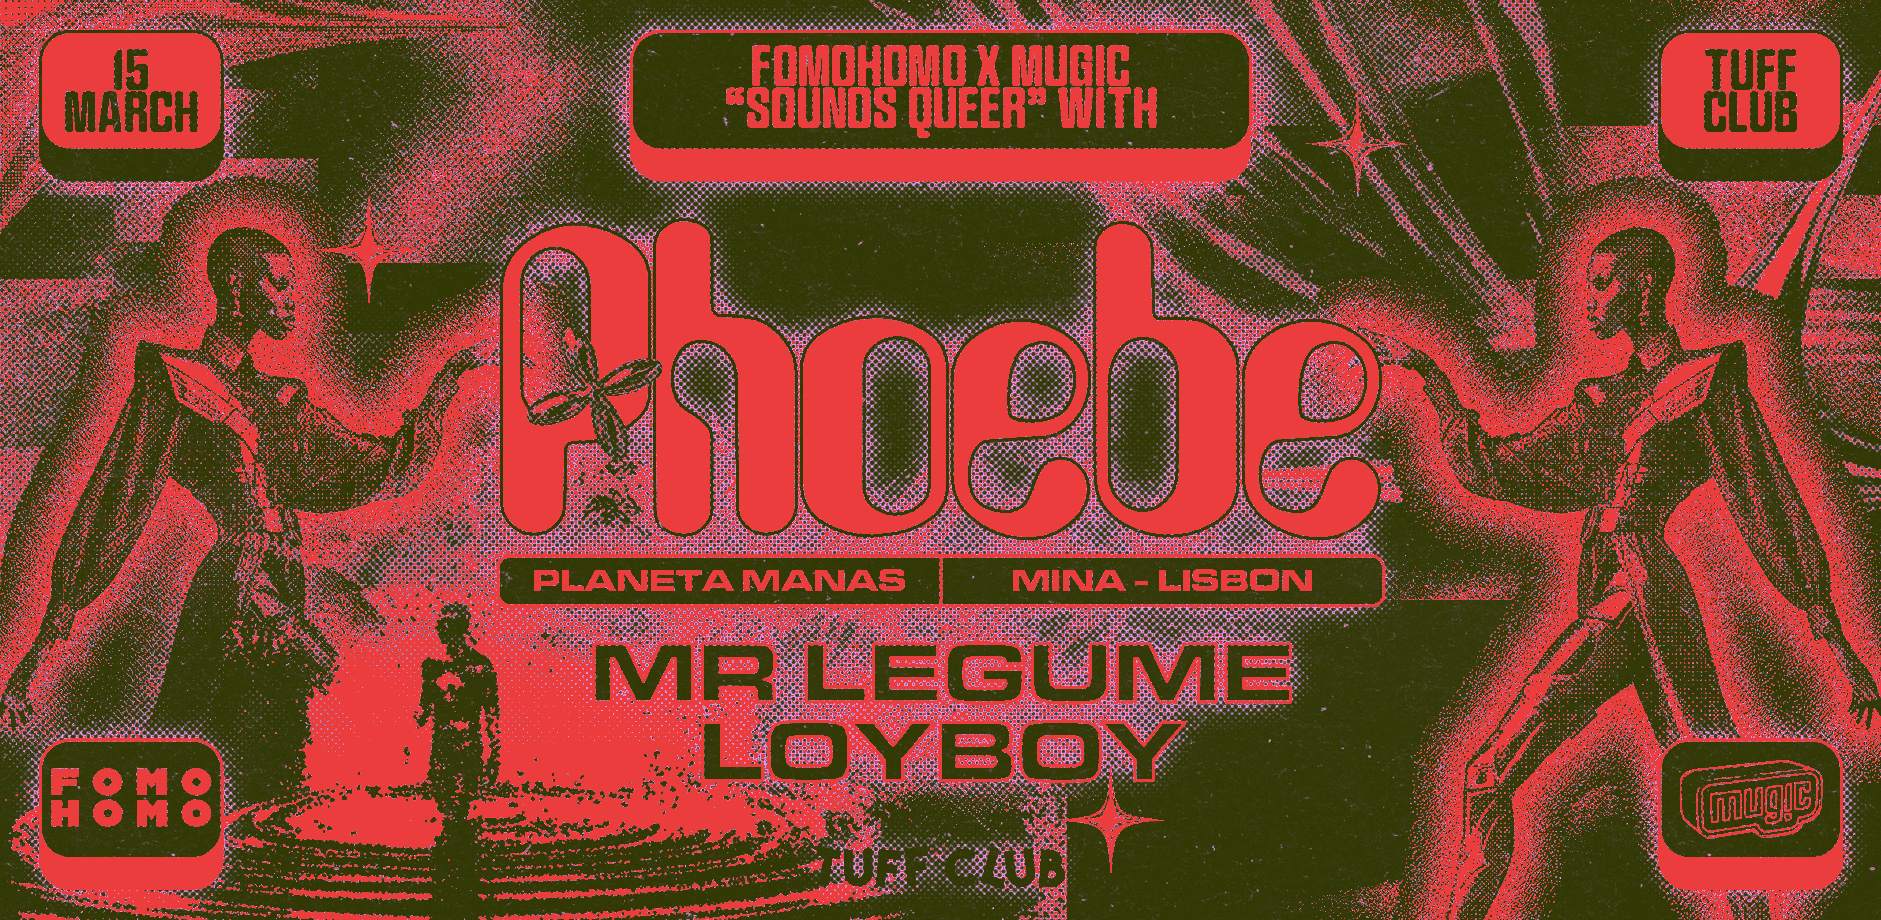 FOMOHOMO x MUGIC presents SOUNDS QUEER with PHOEBE - フライヤー表